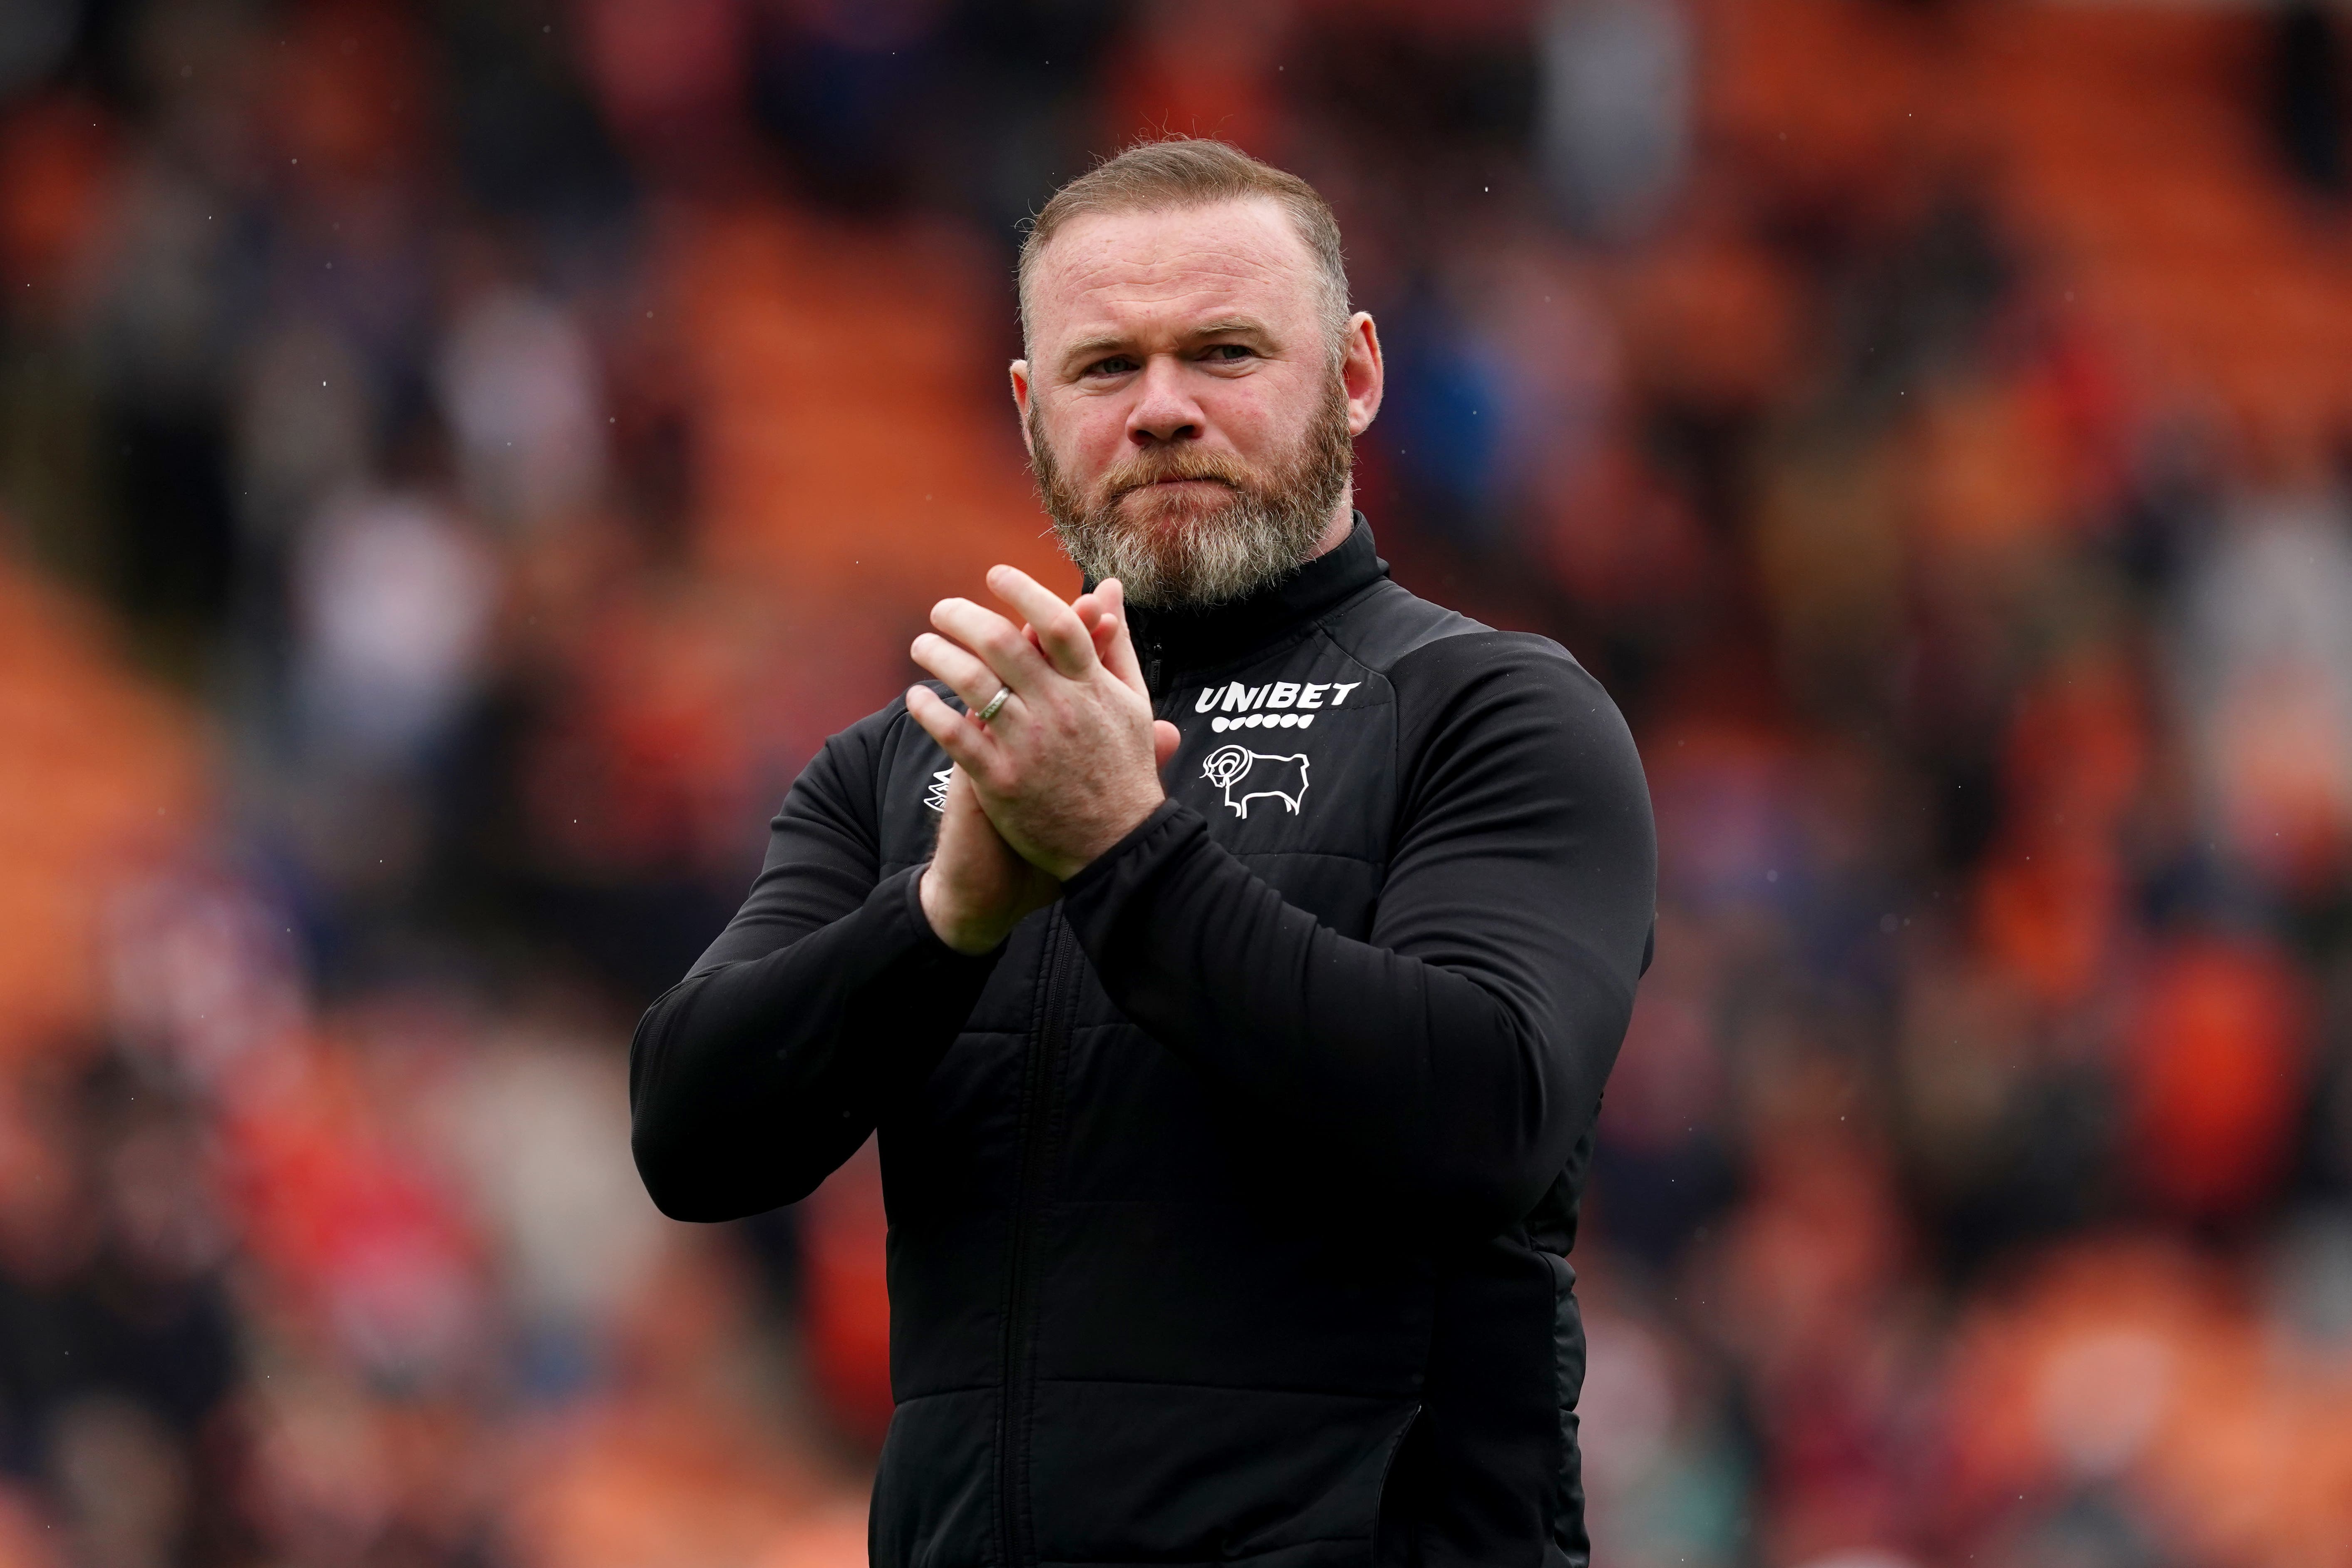 Wayne Rooney is the new manager of Birmingham City